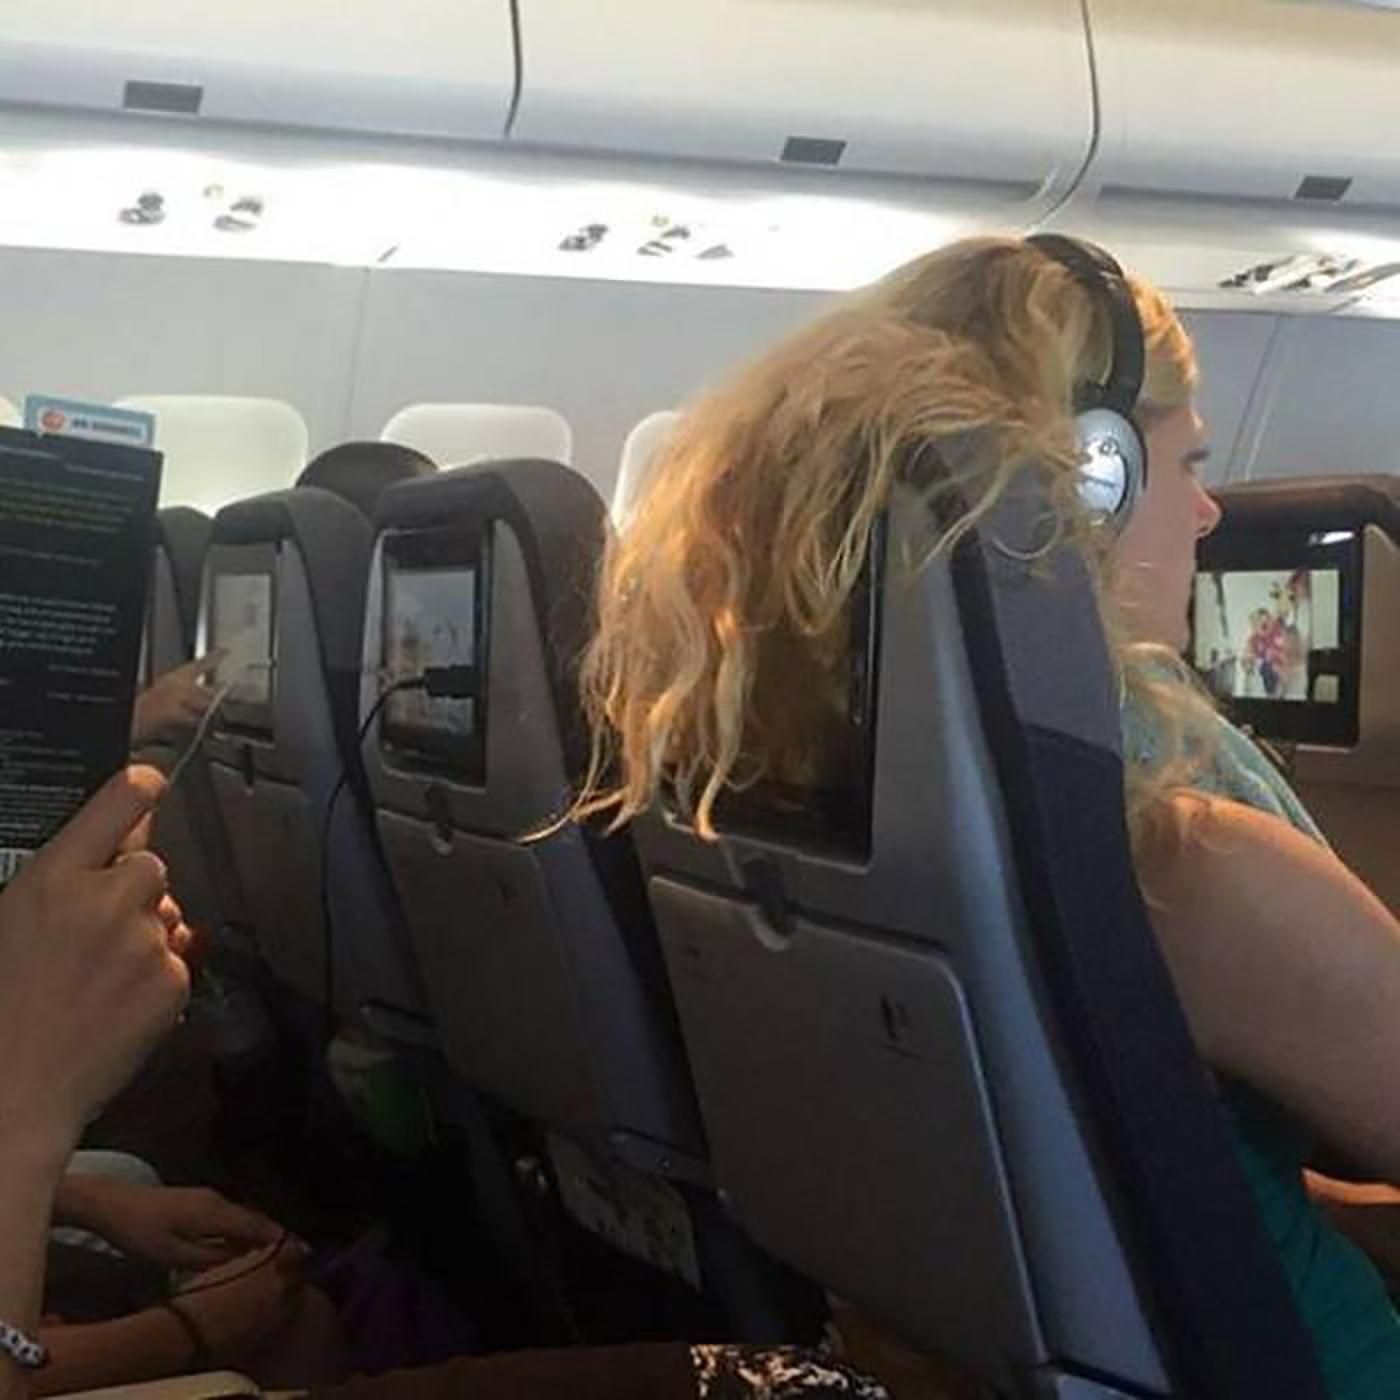 Women covering the airplane tv with her hair